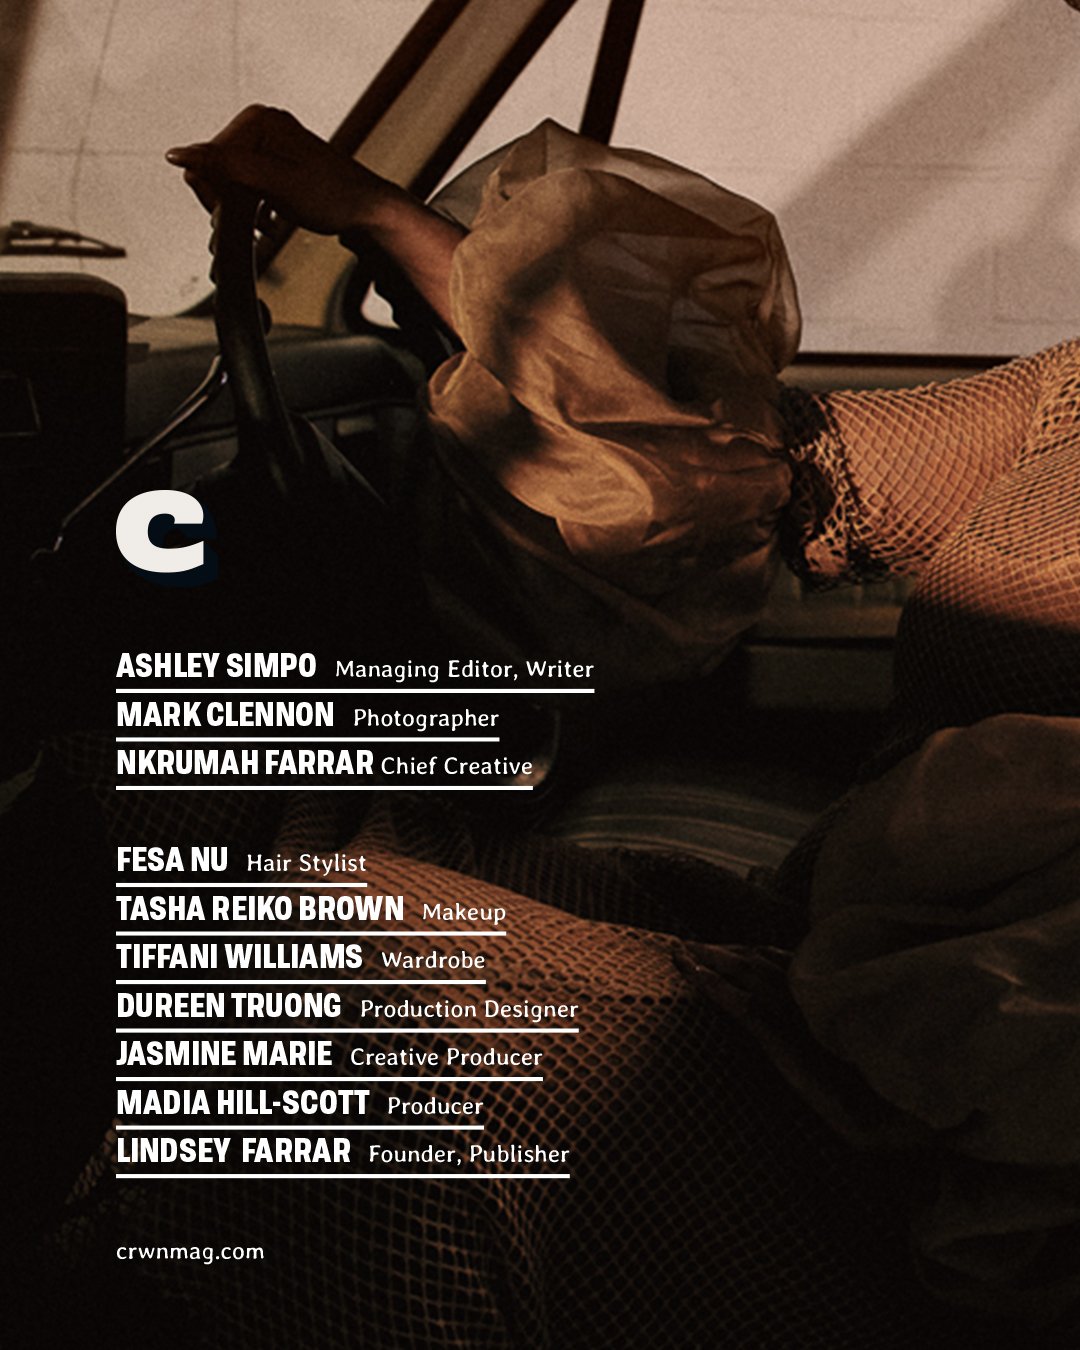 Tracee for CRWNMAG-cover-announcement-07.jpg